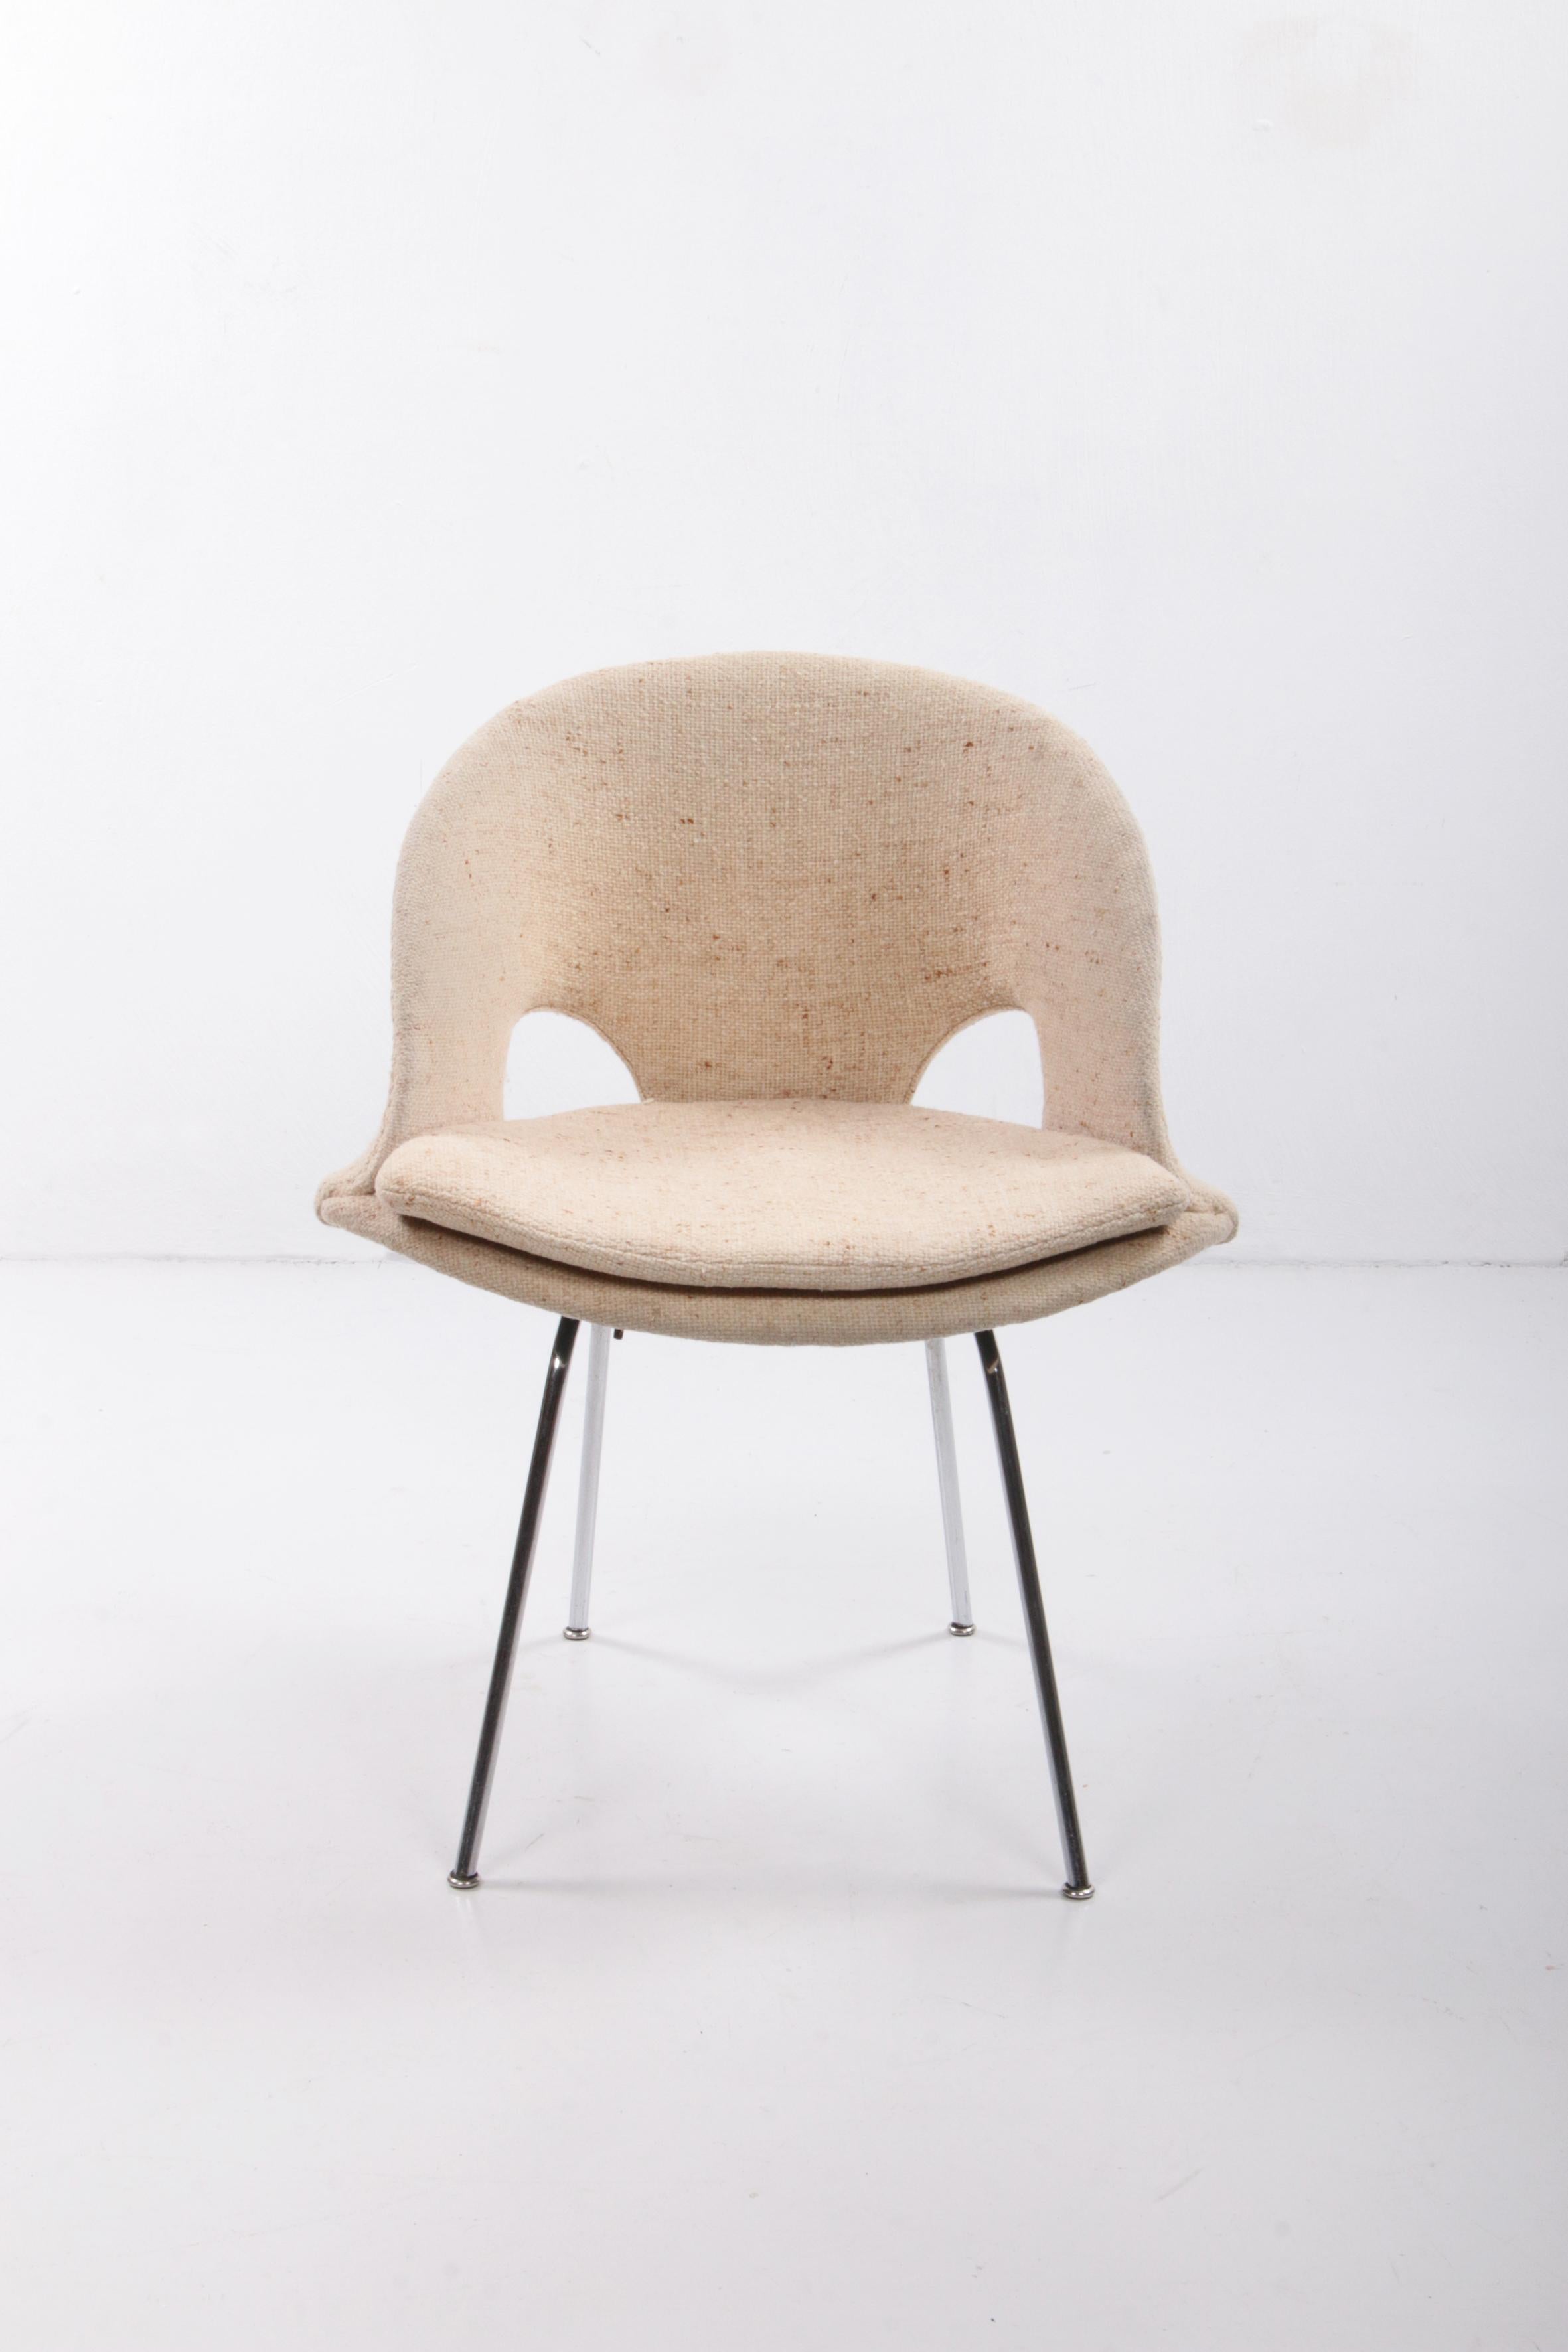 Mid-Century Modern Knoll Dining Chair Model 350, Germany, 1950